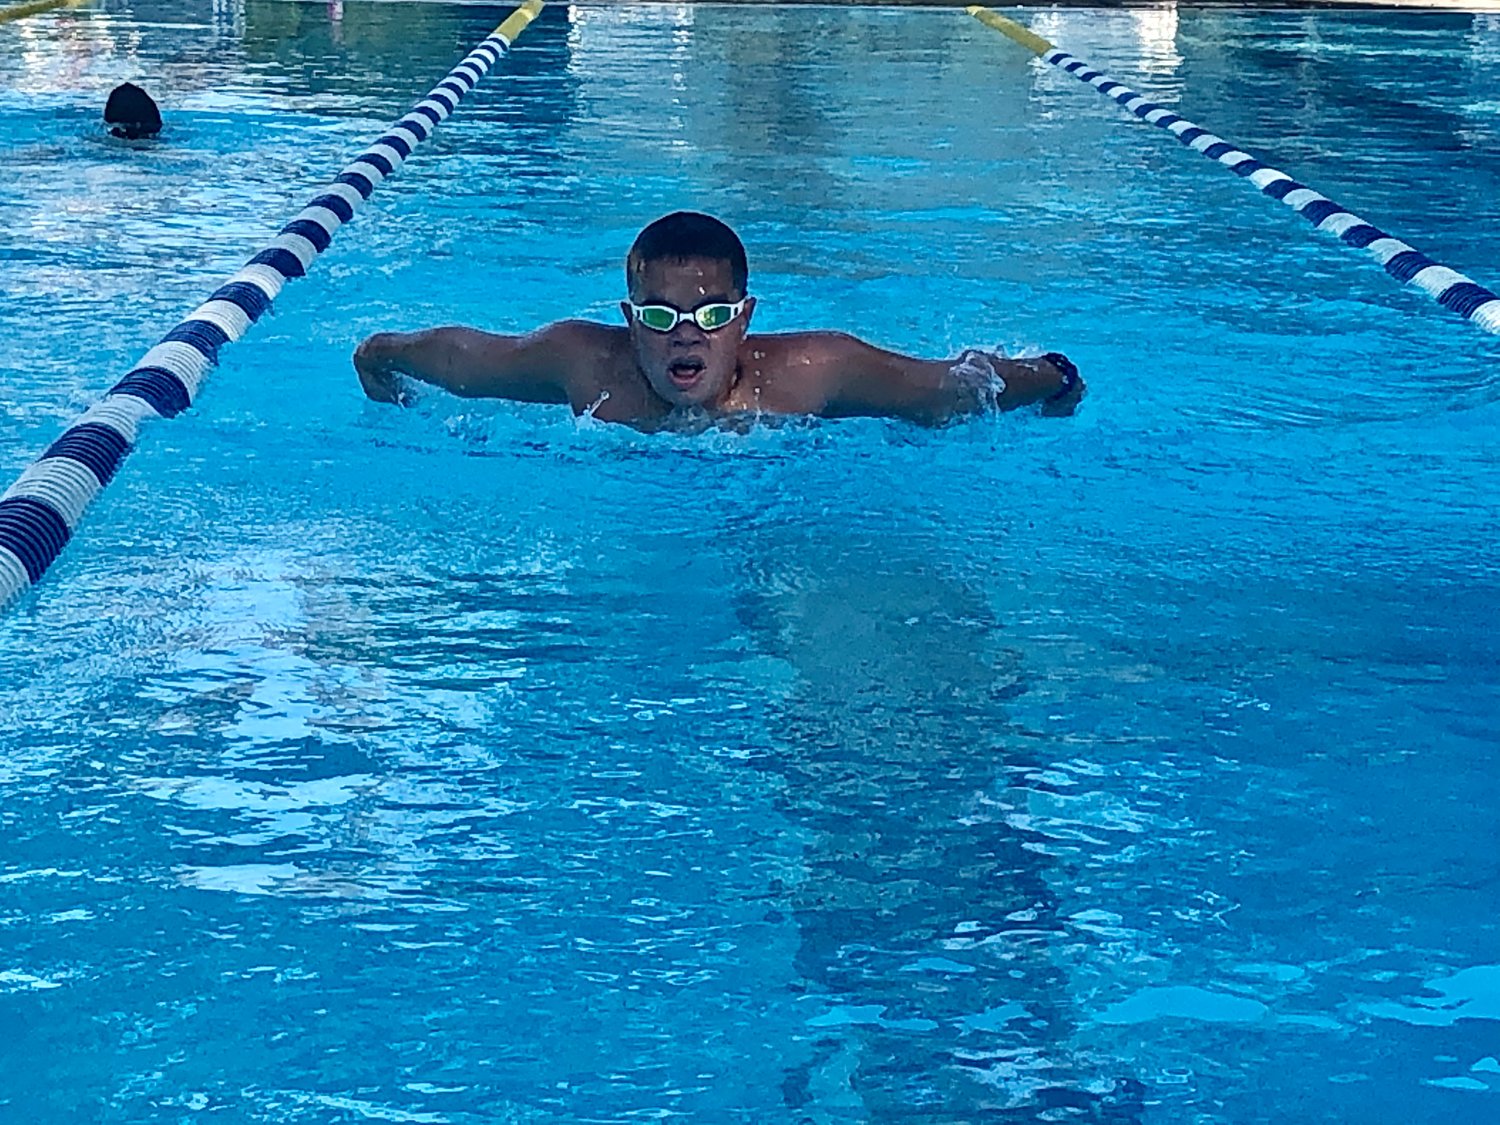 Jason Diaz was one of five young Lynbrook residents who got in the pool early on Aug. 17